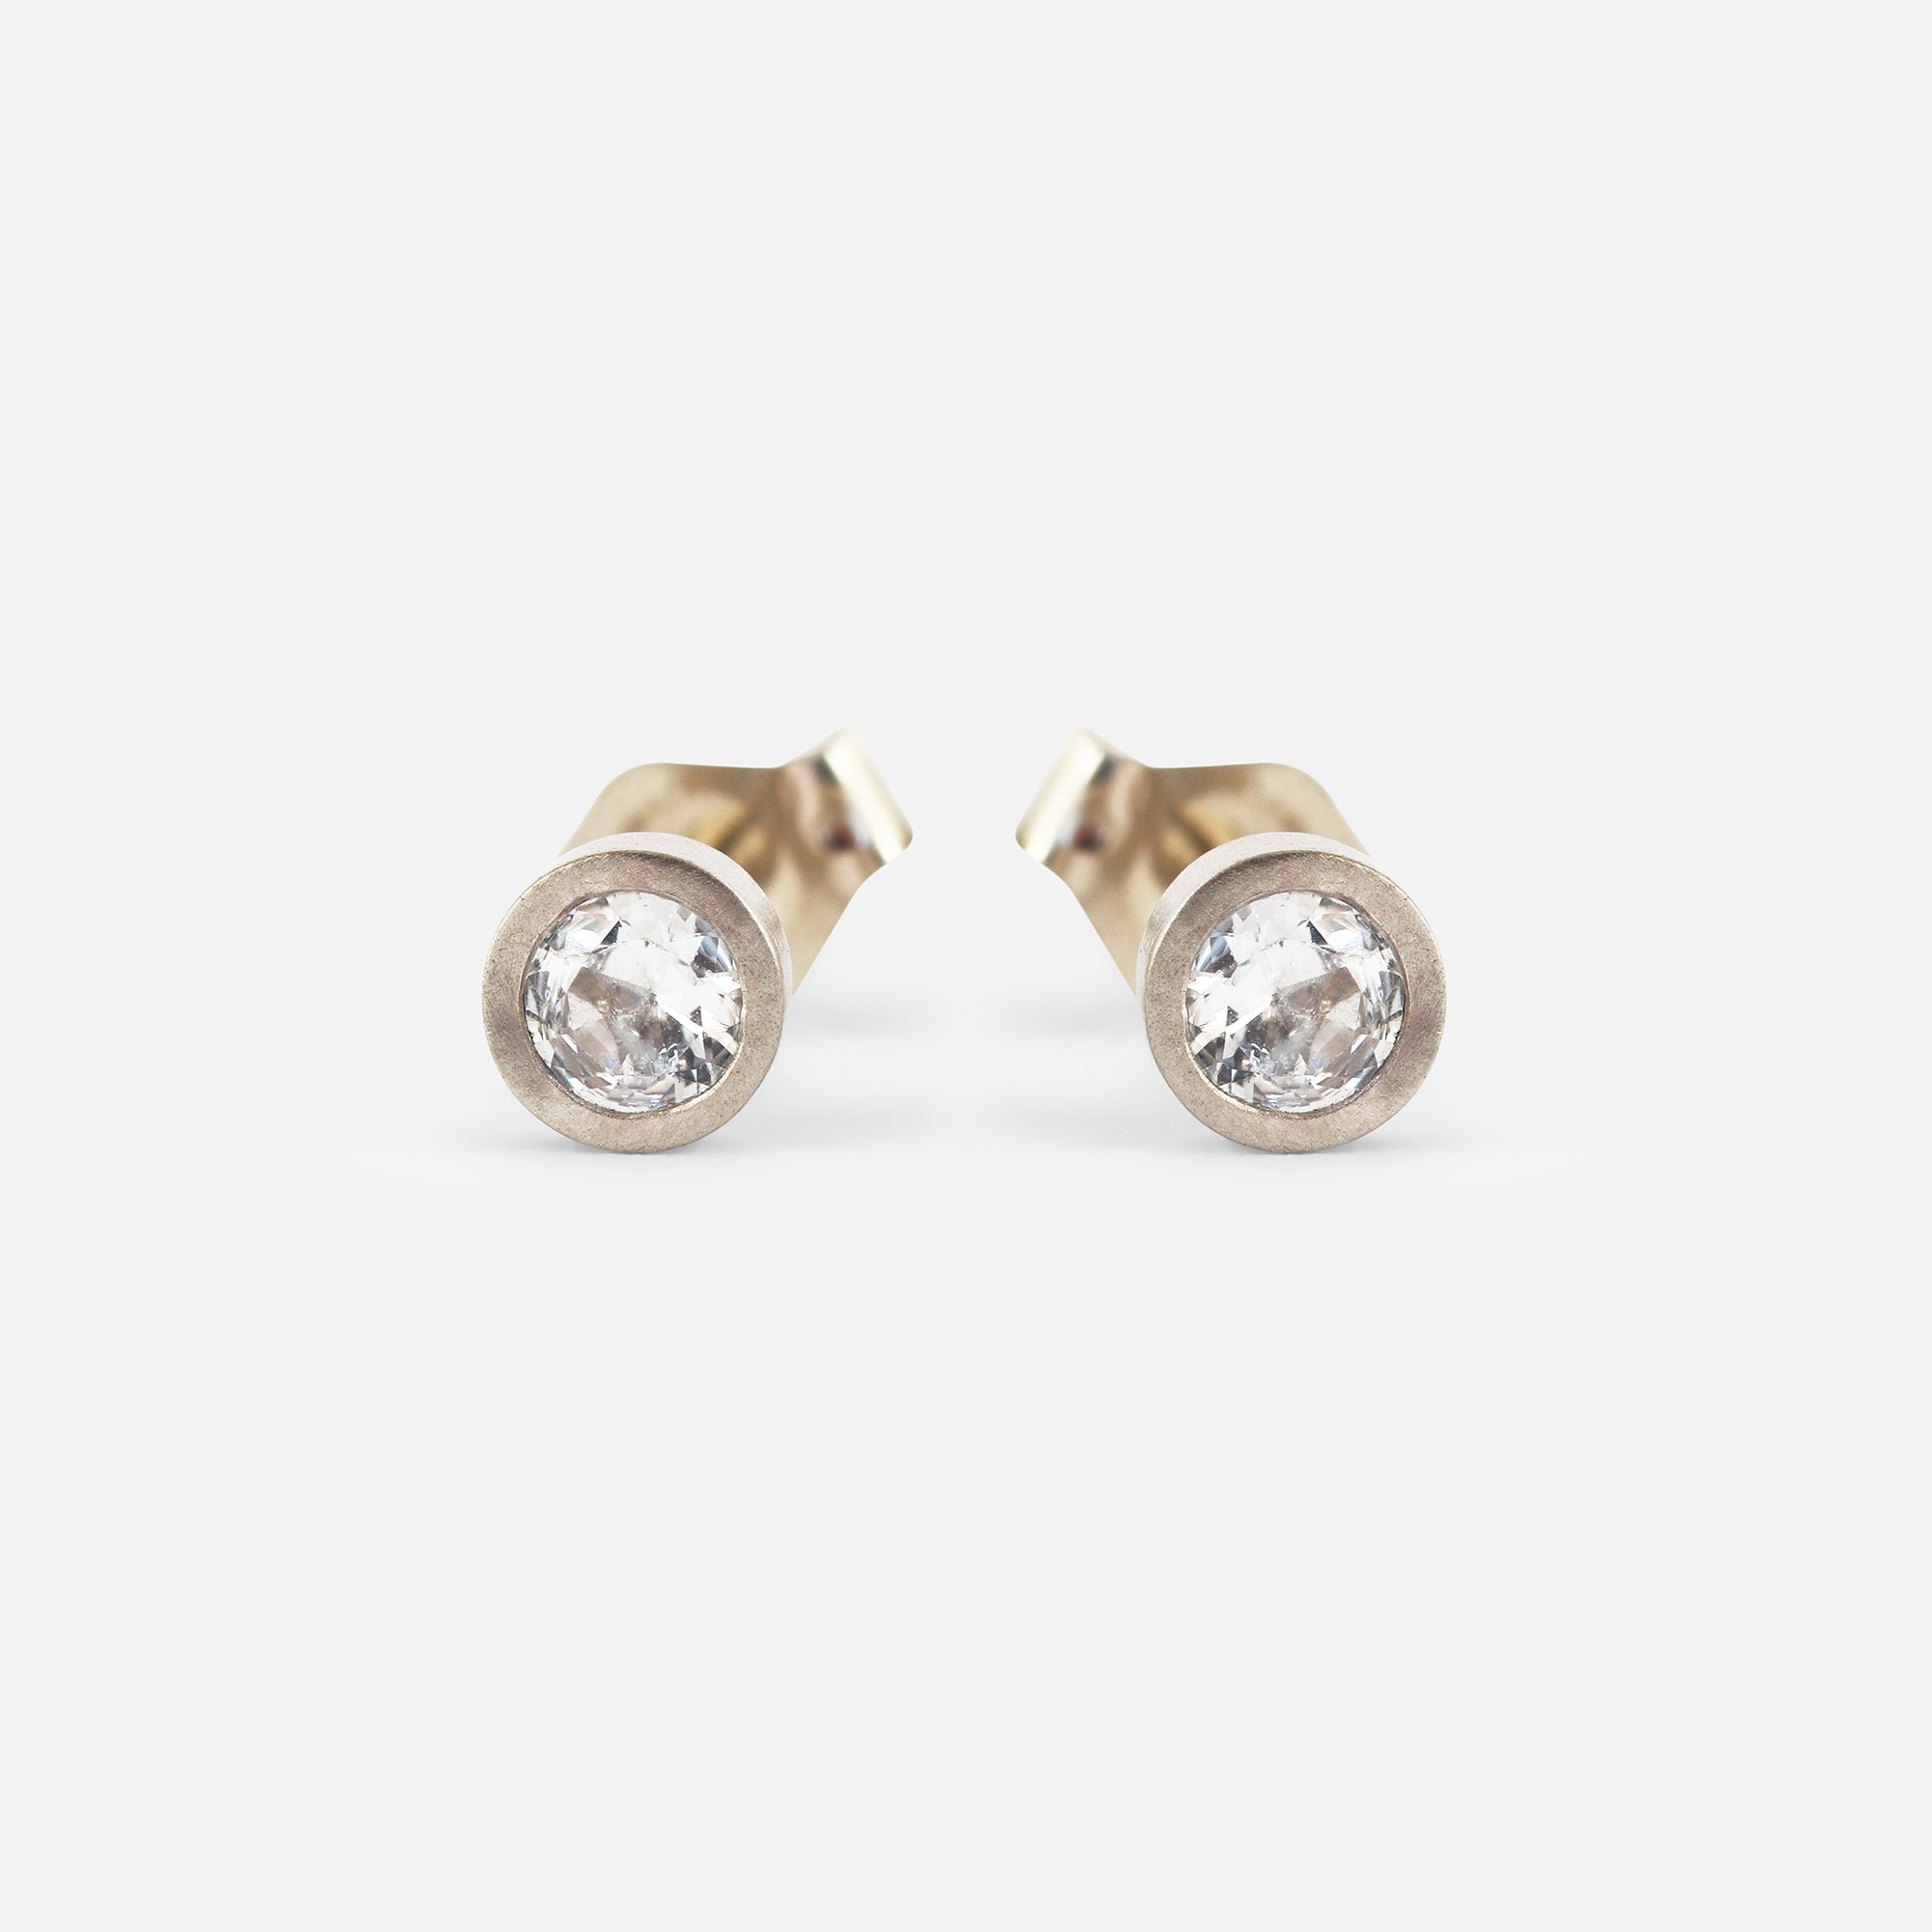 White Sapphire / Studs By Tricia Kirkland in earrings Category